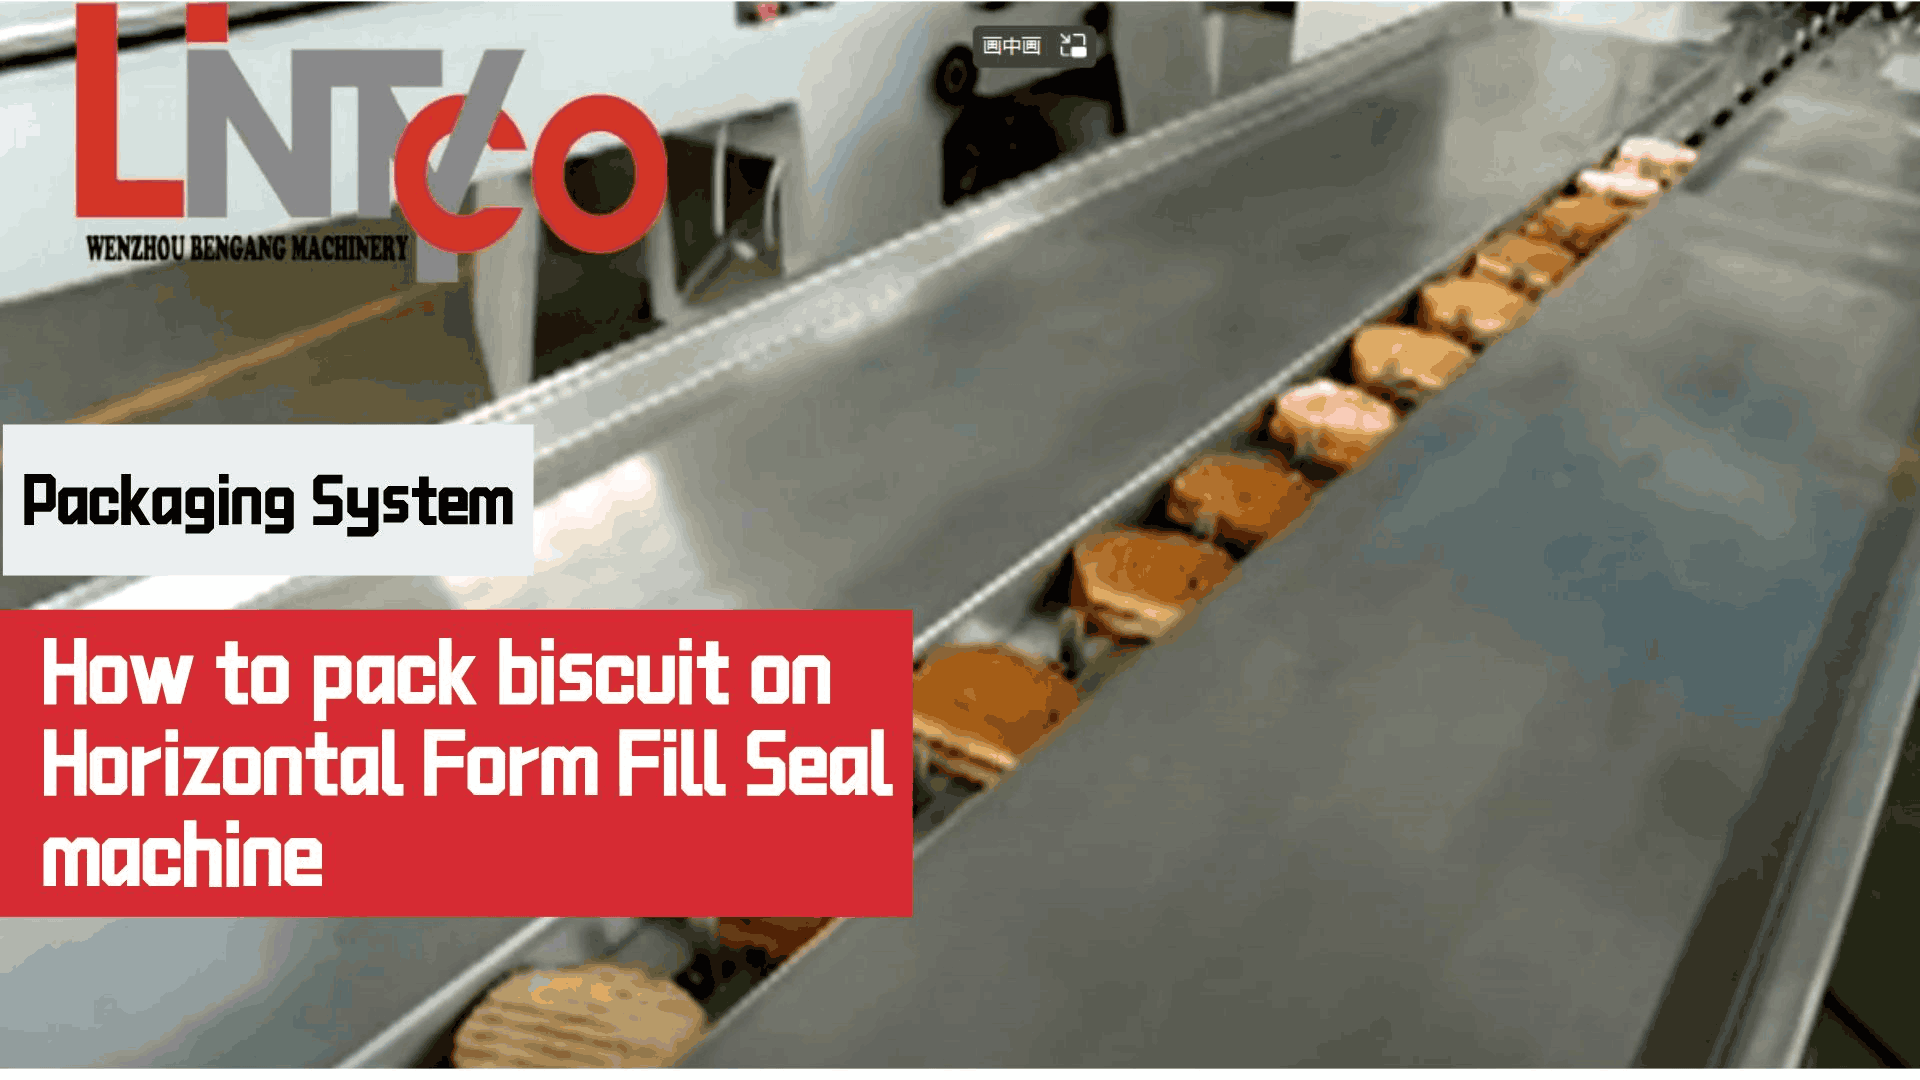 How to pack biscuit on Horizontal Form Fill Seal machine